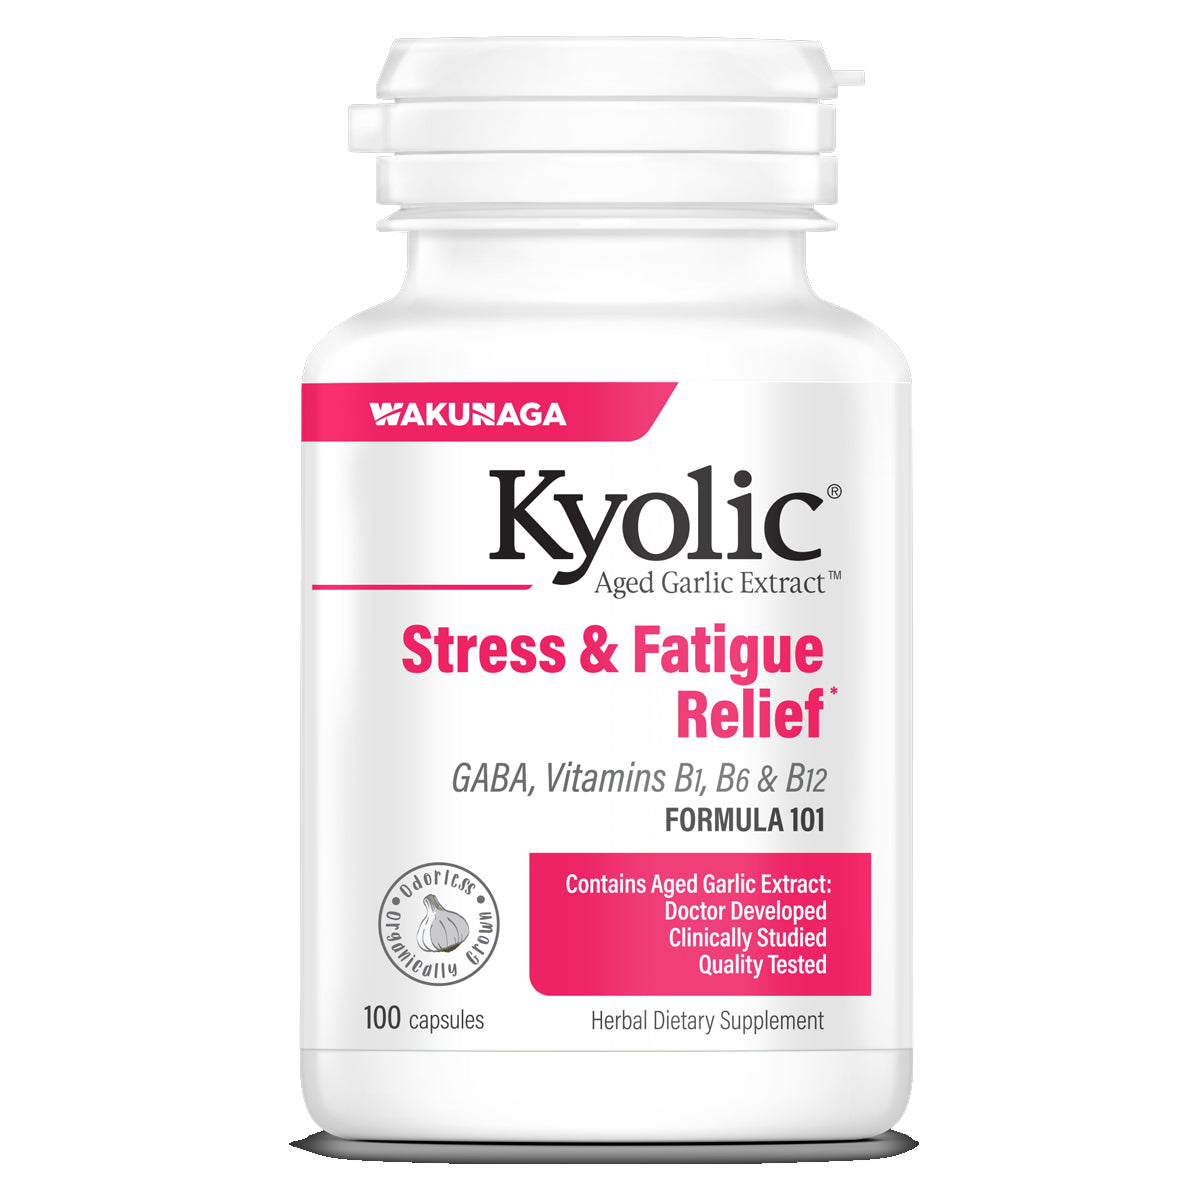 Aged Garlic Extract Formula 101 Stress & Fatigue Relief